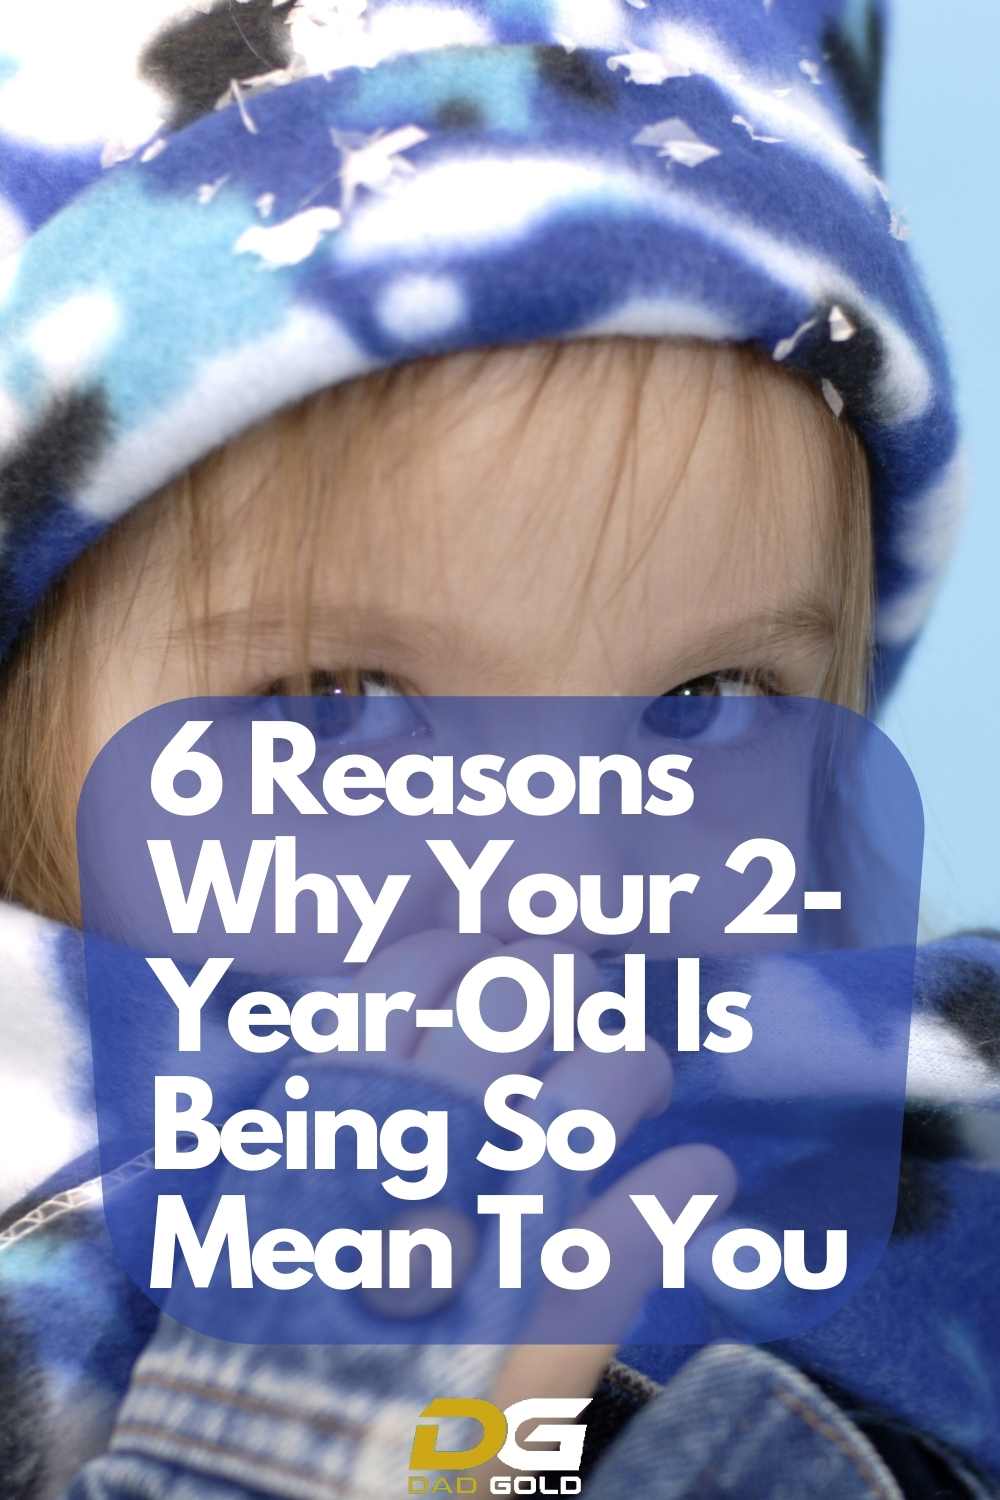 6 Reasons Why Your 2-Year-Old Is Being So Mean To You